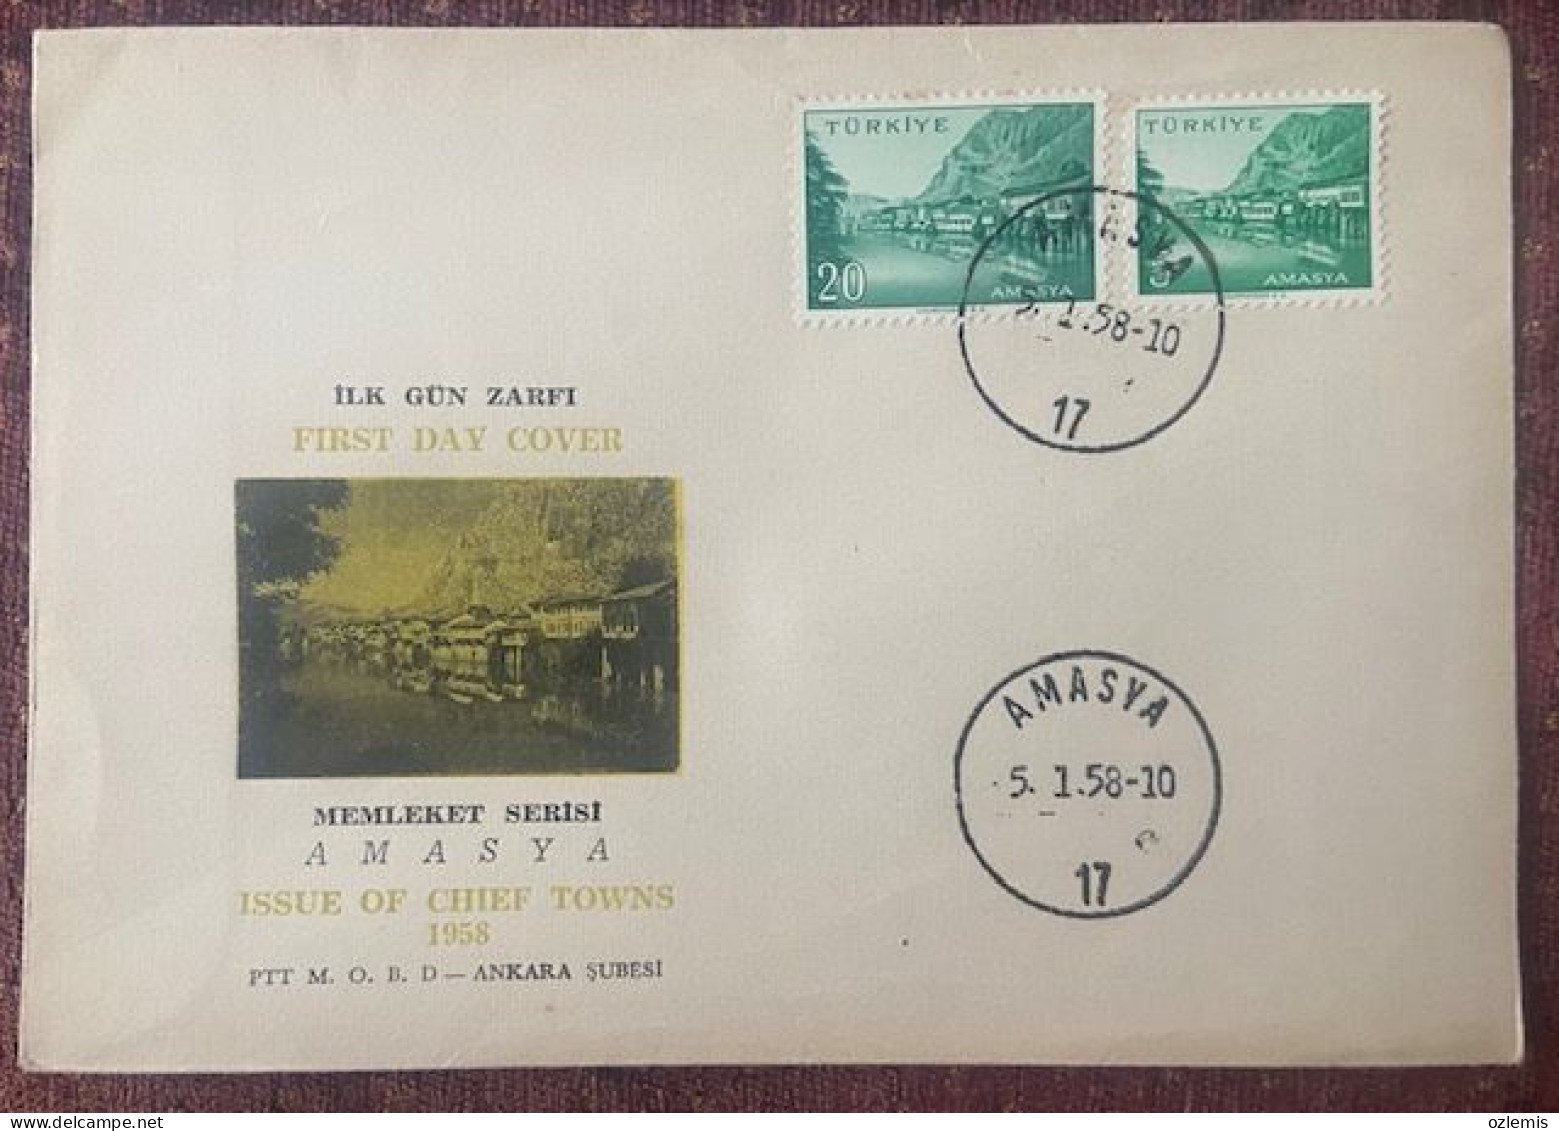 TURKEY,TURKEI,TURQUIE ,AMASYA  ,STAMP,ISSUE OF CHIEF TOWNS  ,1958 ,COVER - Covers & Documents